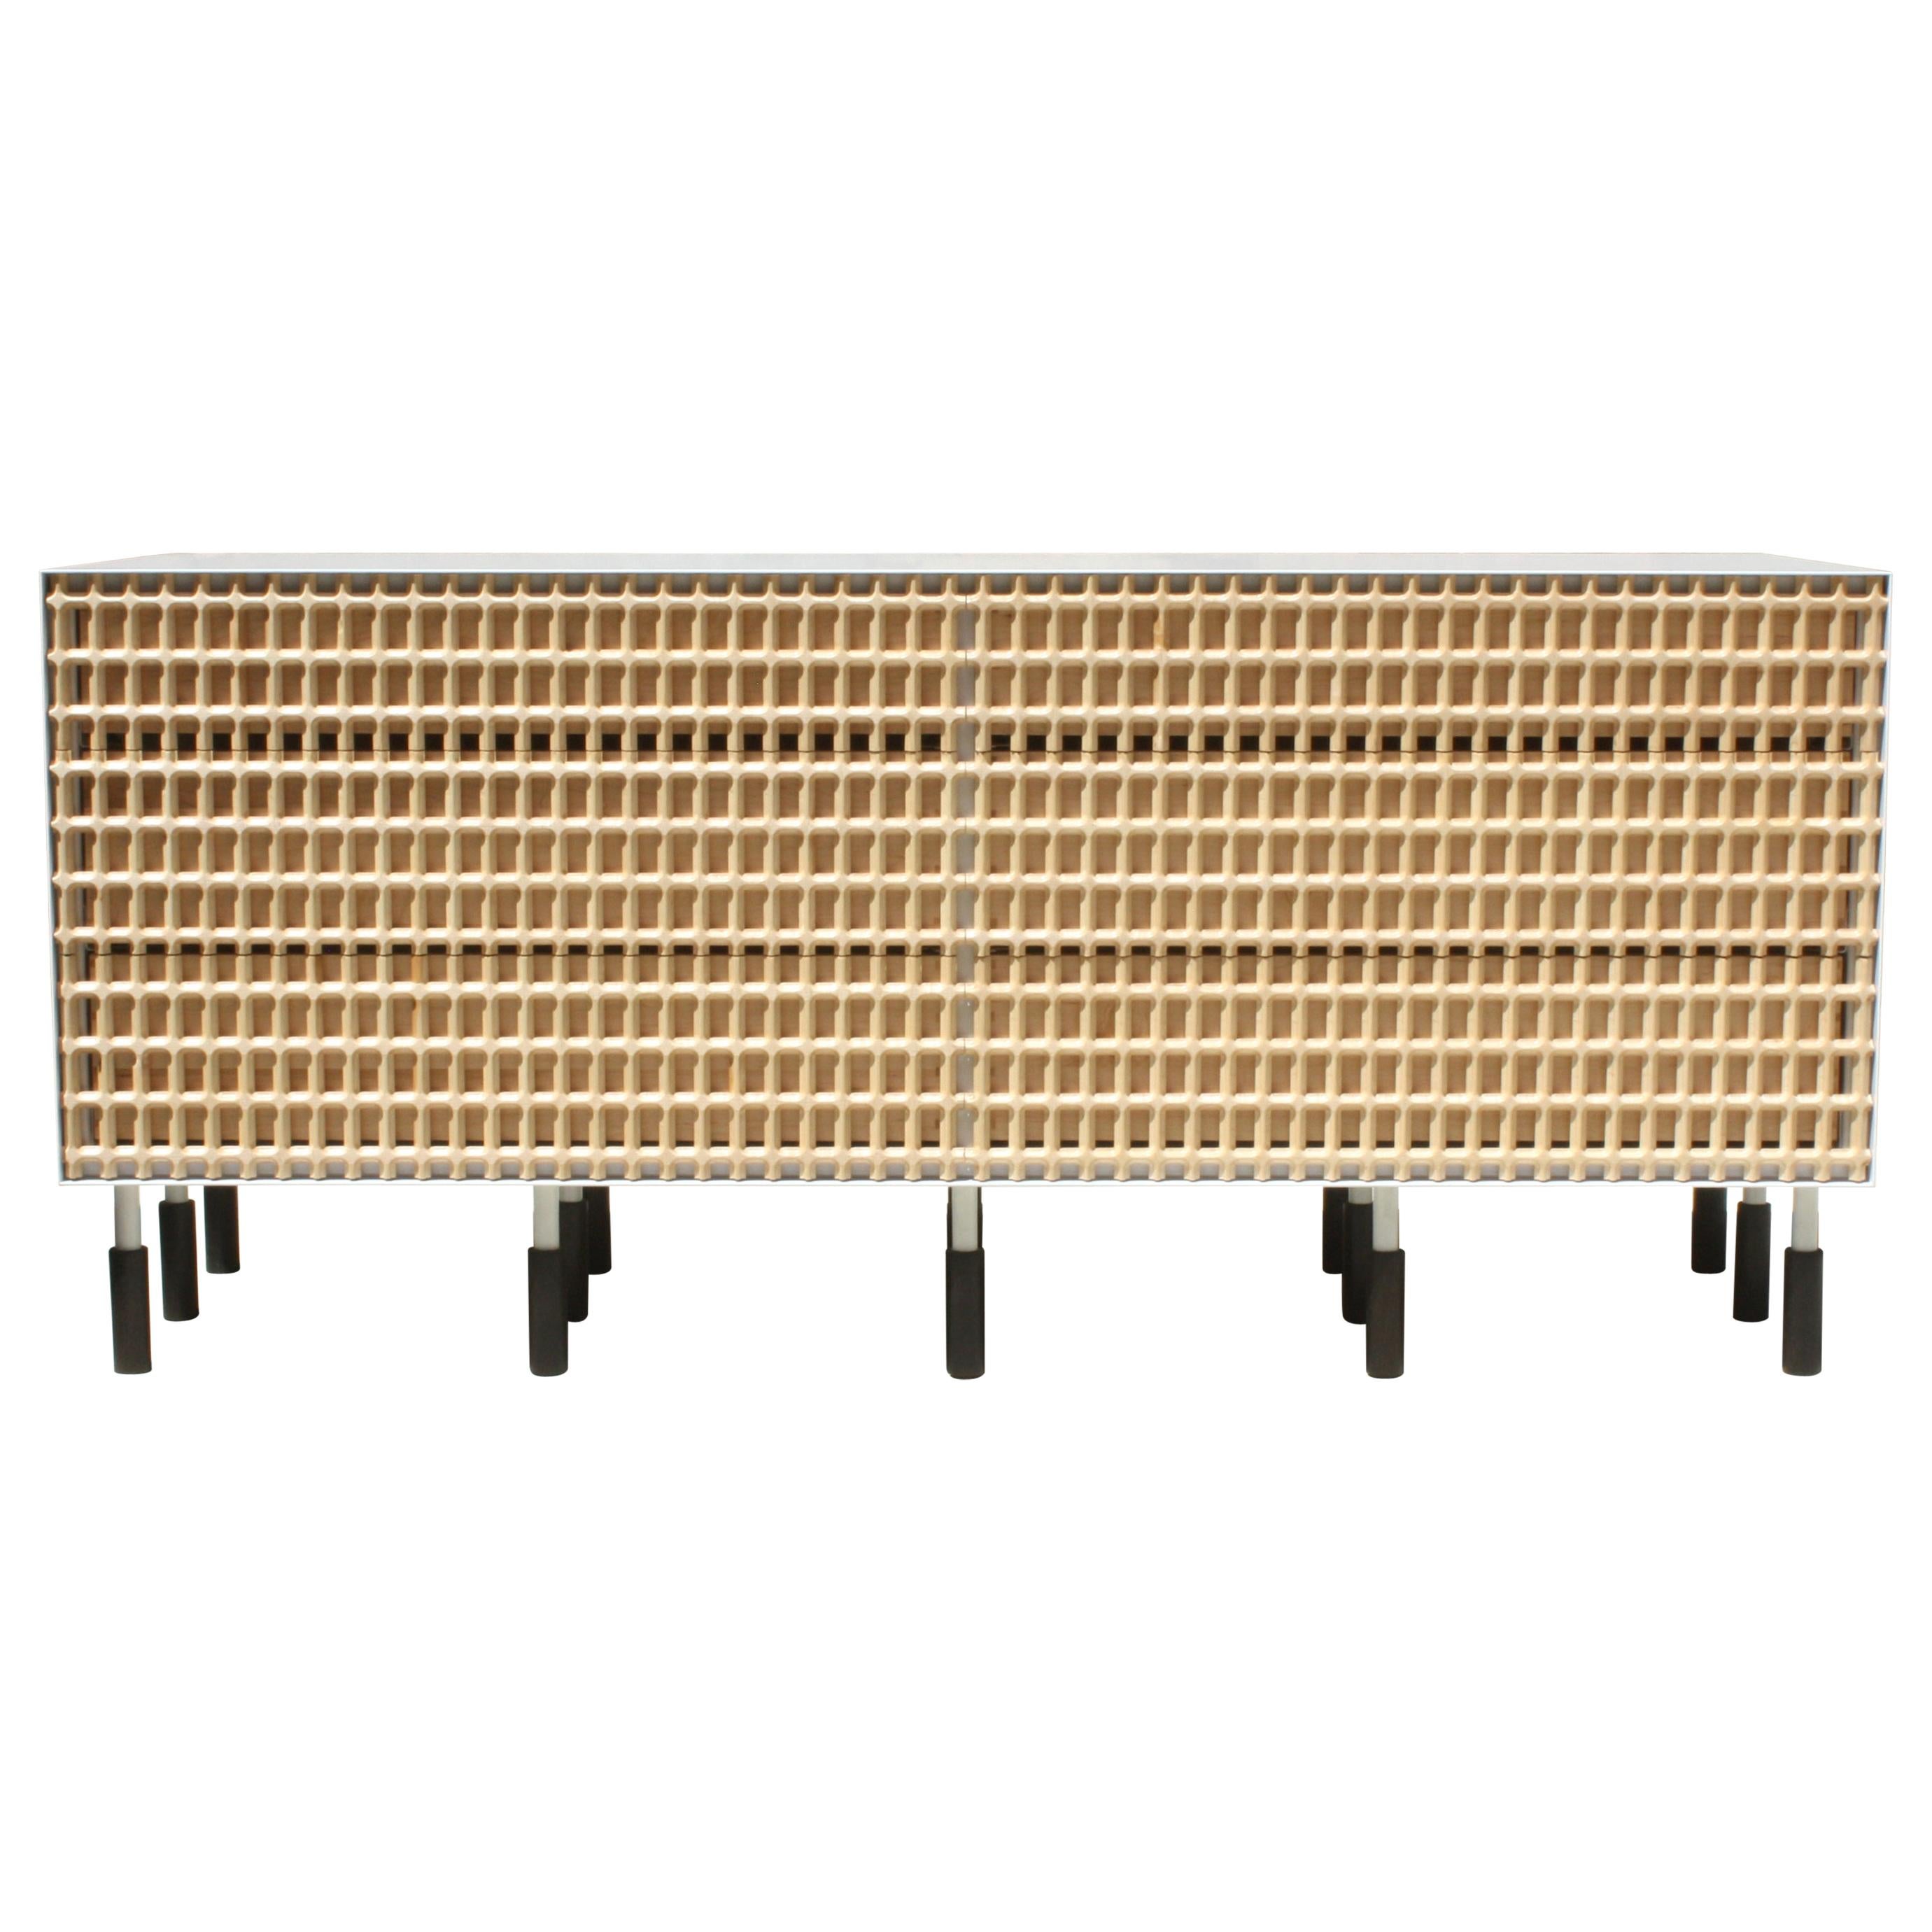 Sunbreaker Limited Edition Credenza or Sideboard by Laylo Studio